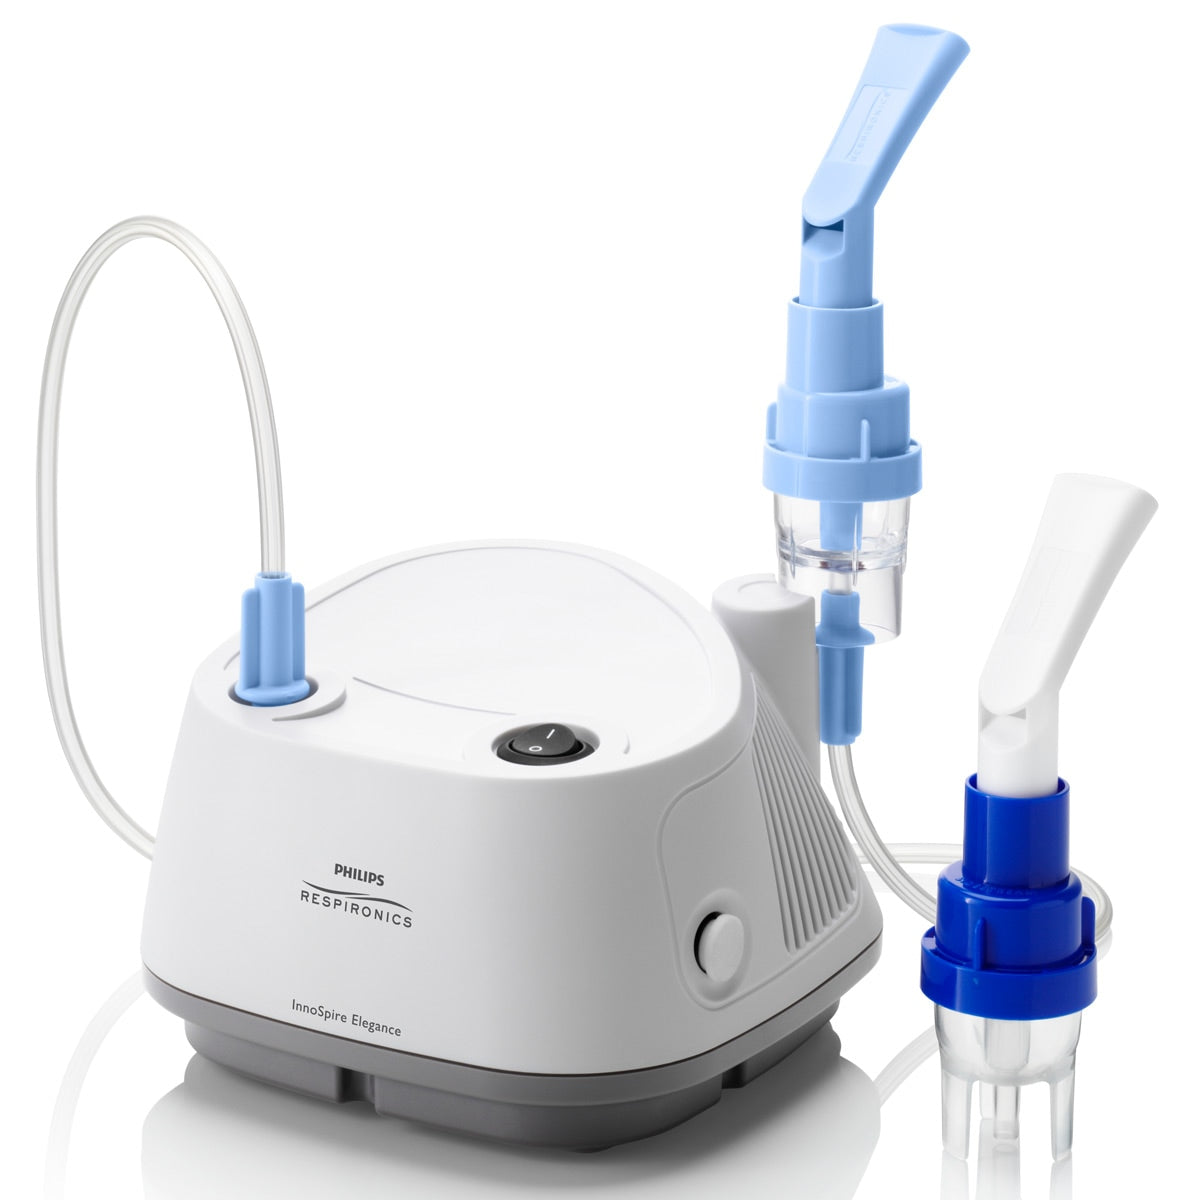 InnoSpire Elegance Compressor Kit with Reusable & Disposable SideStream Nebulizers